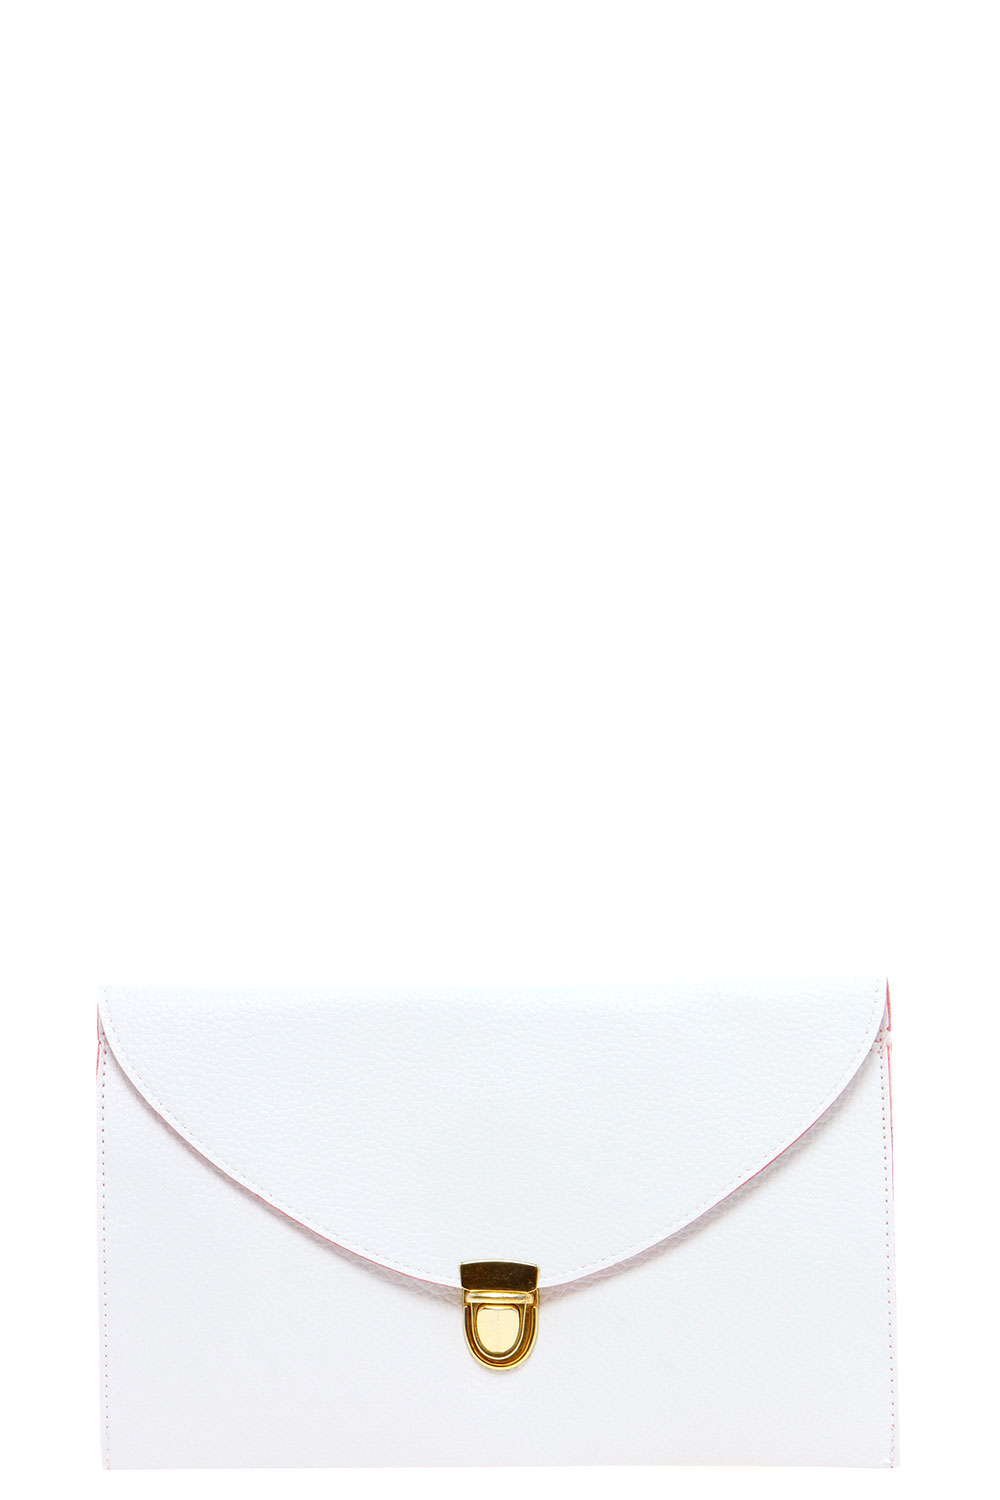 Lily Clasp Fasten Clutch Bag - white